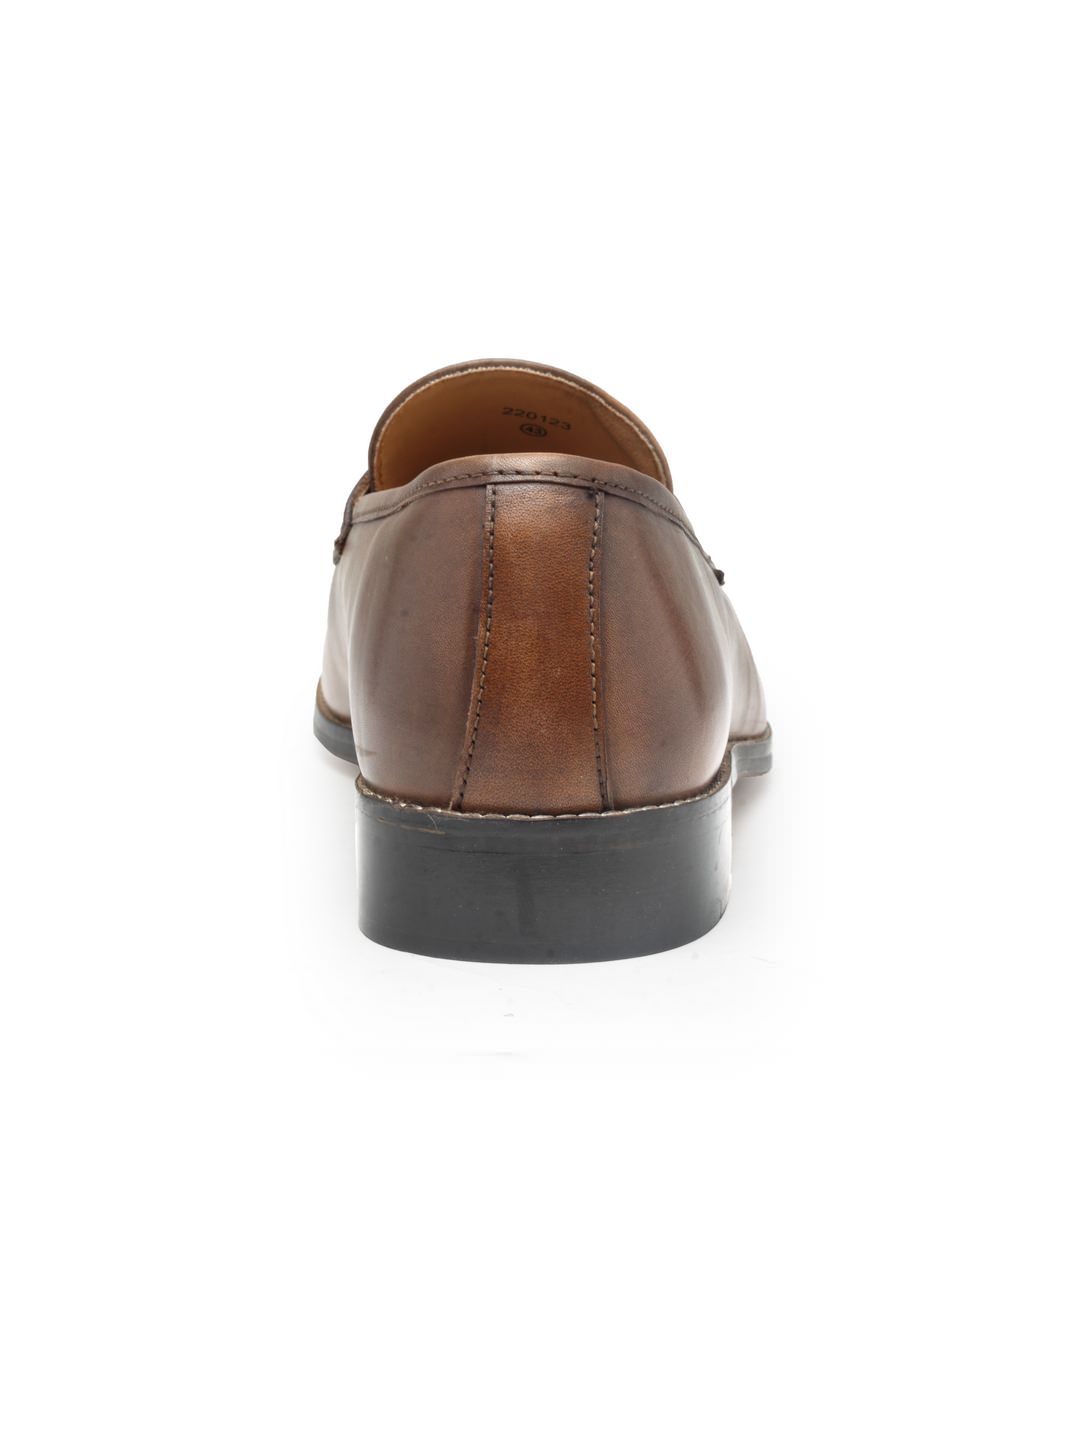 Buy Online loafer shoes in india- Leather lofers shoes for Men&#39;s